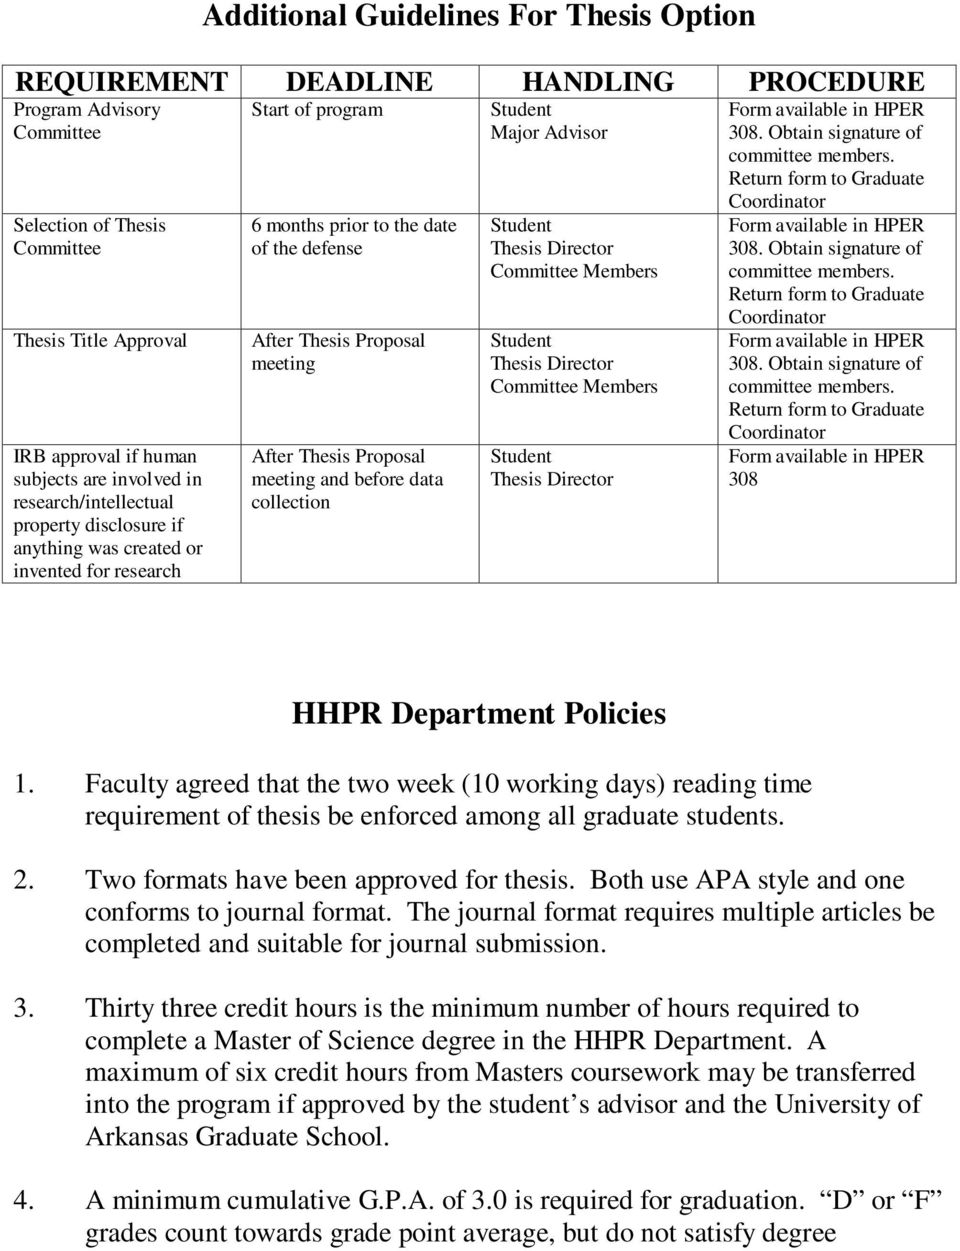 Thesis Proposal meeting and before data collection Major Advisor Thesis Director Committee Members Thesis Director Committee Members Thesis Director Form available in HPER 308.